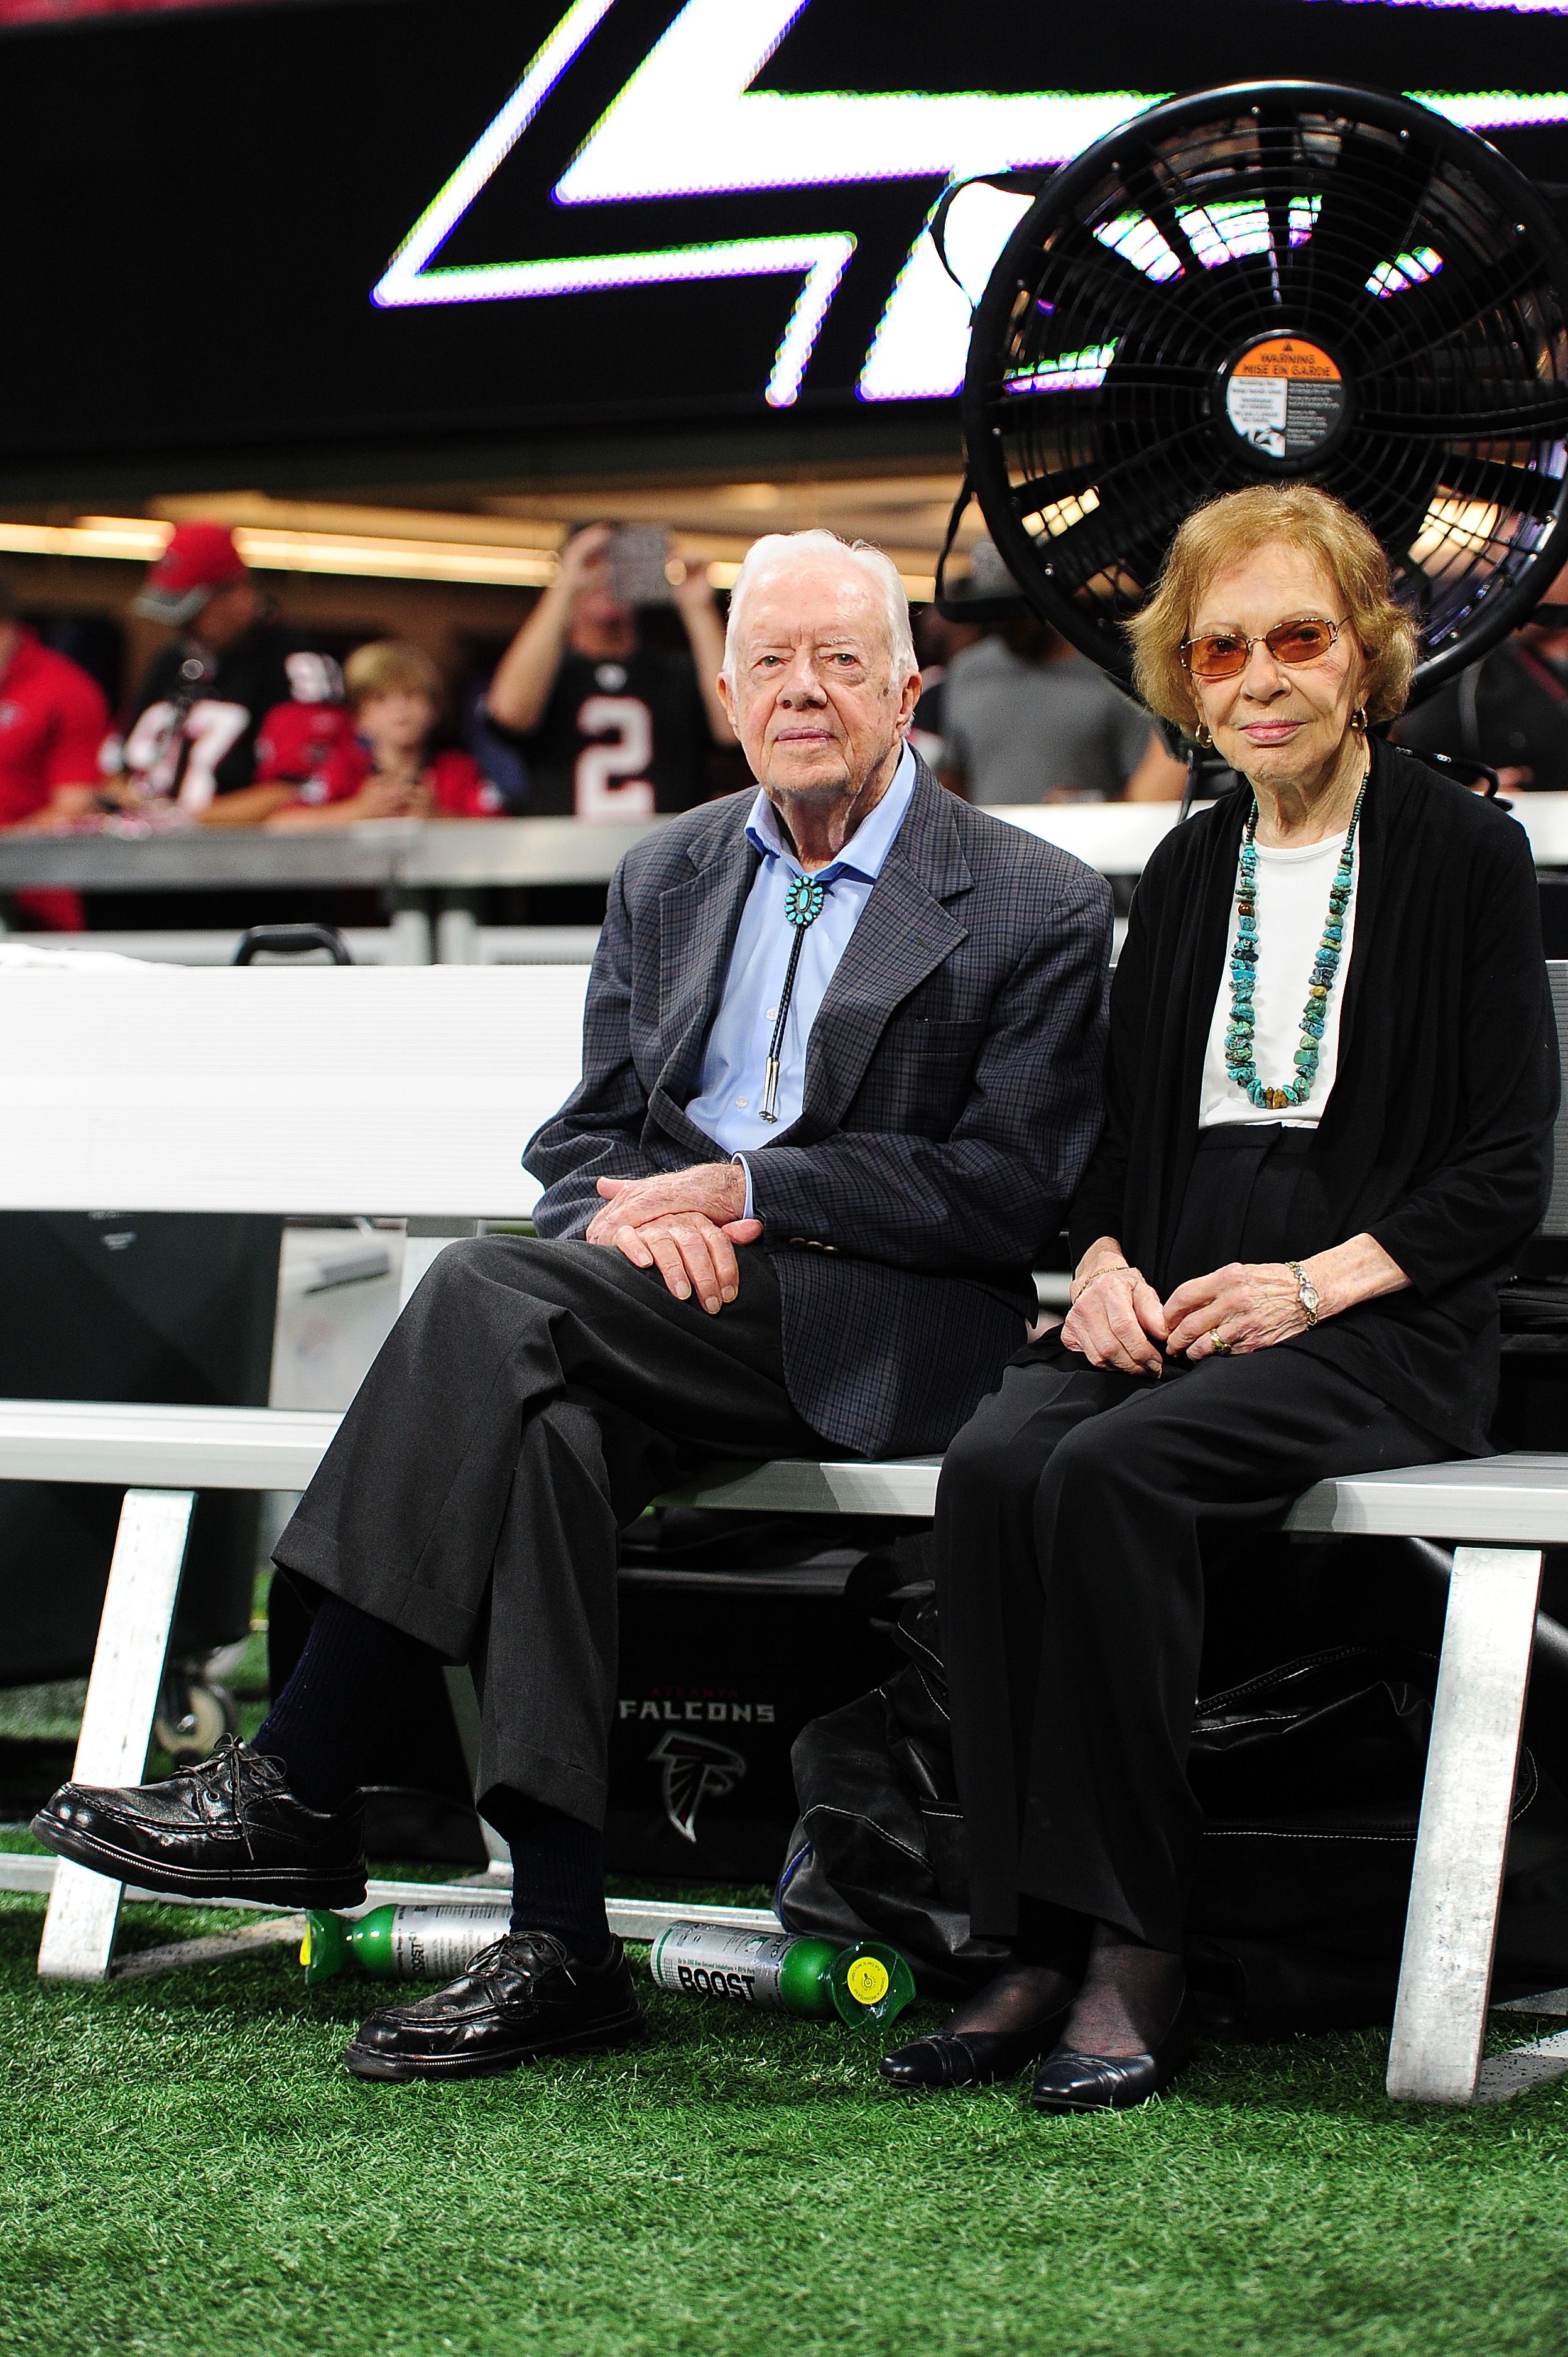 Former President Jimmy Carter and his wife Rosalynn at Mercedes-Benz Stadium on September 30, 2018, in Atlanta, Georgia | Photo: Scott Cunningham/Getty Images